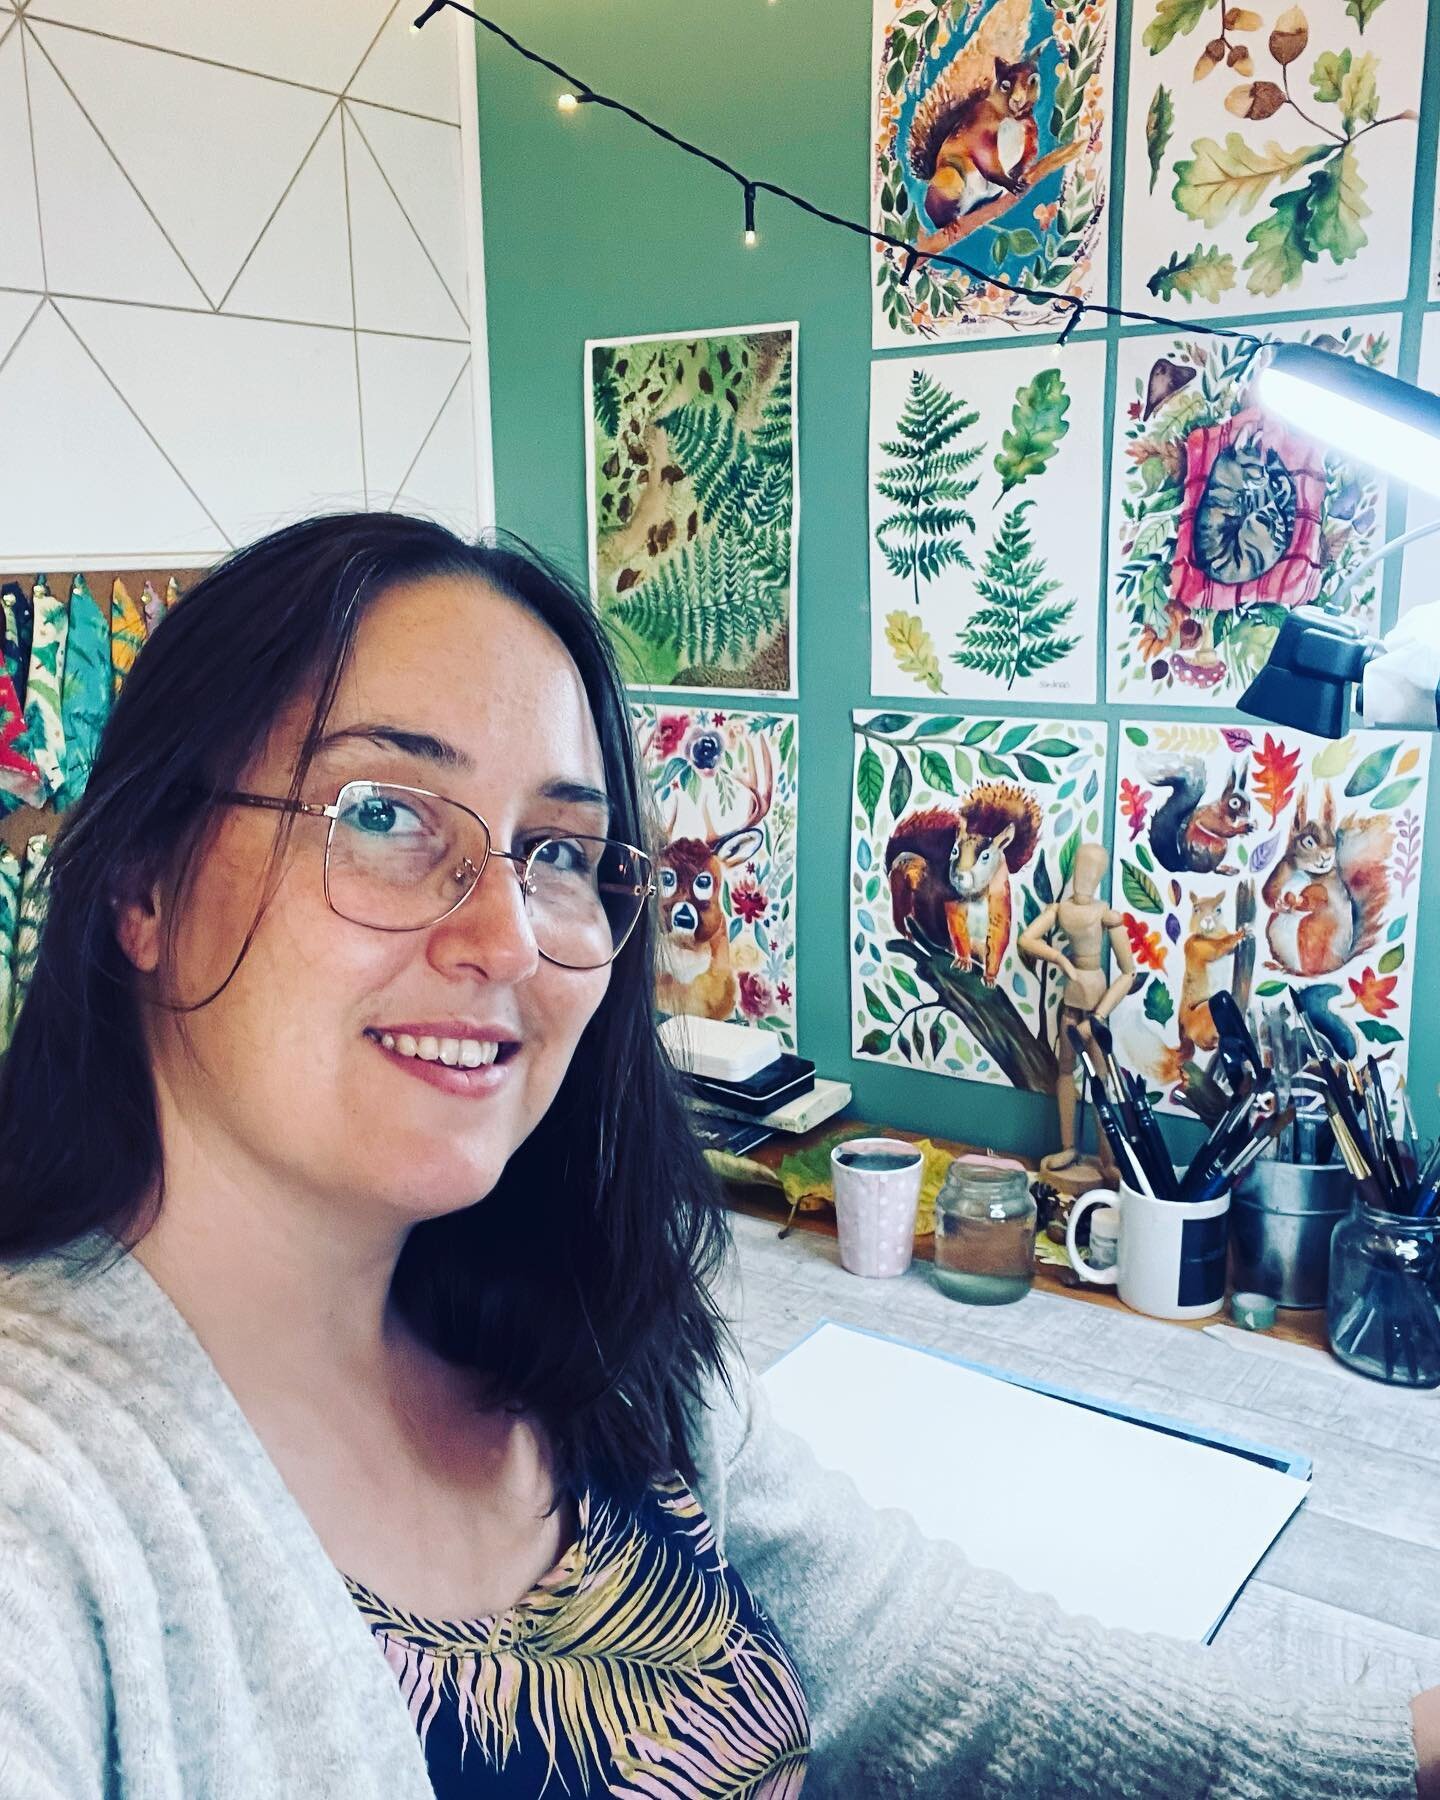 Workplace update! 😁🥳
.
I was staring at a - beautiful - green wall last couple of weeks, since I&rsquo;ve changed my workspace set up..
.
Decided today to hang up a couple of my favorite designs 😍🦊🍁 For more inspiration 🥰
.
I am soooo happy wit